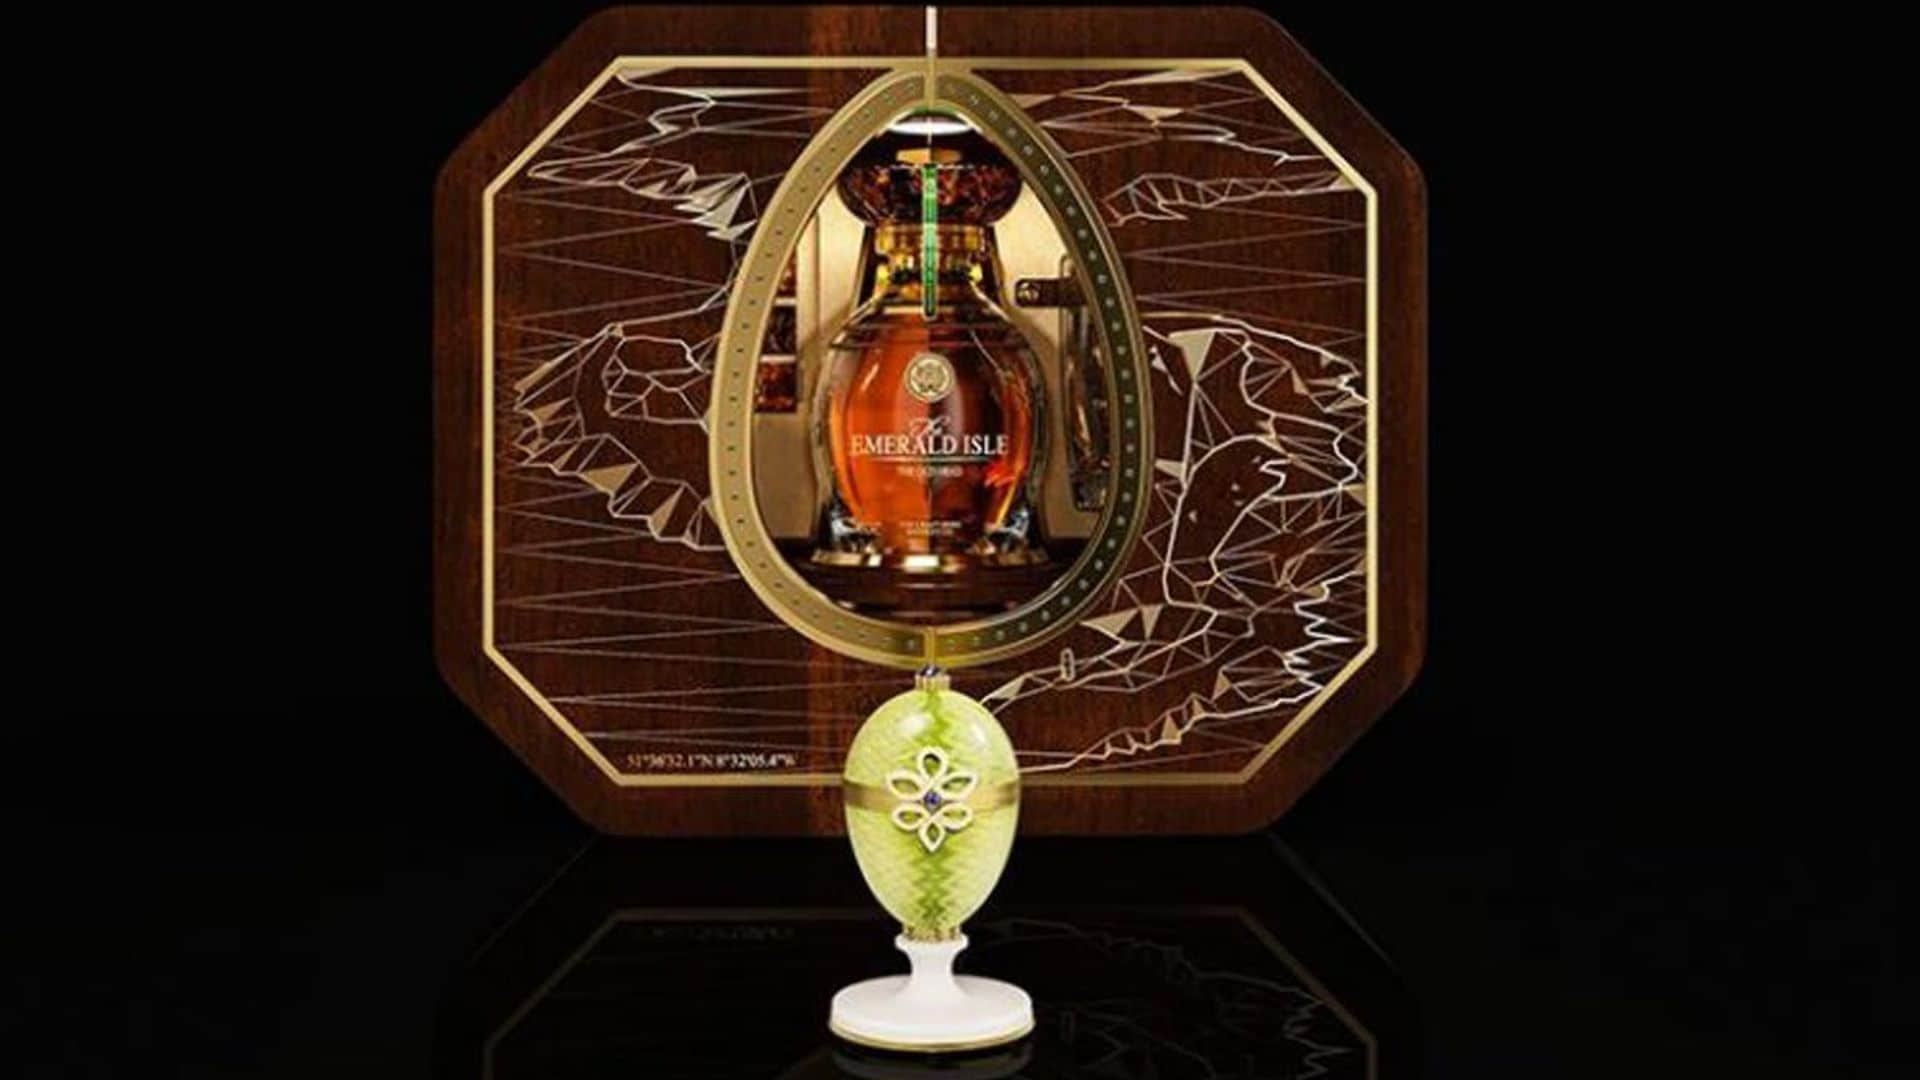 What’s so special about this $2 million Whiskey Set?